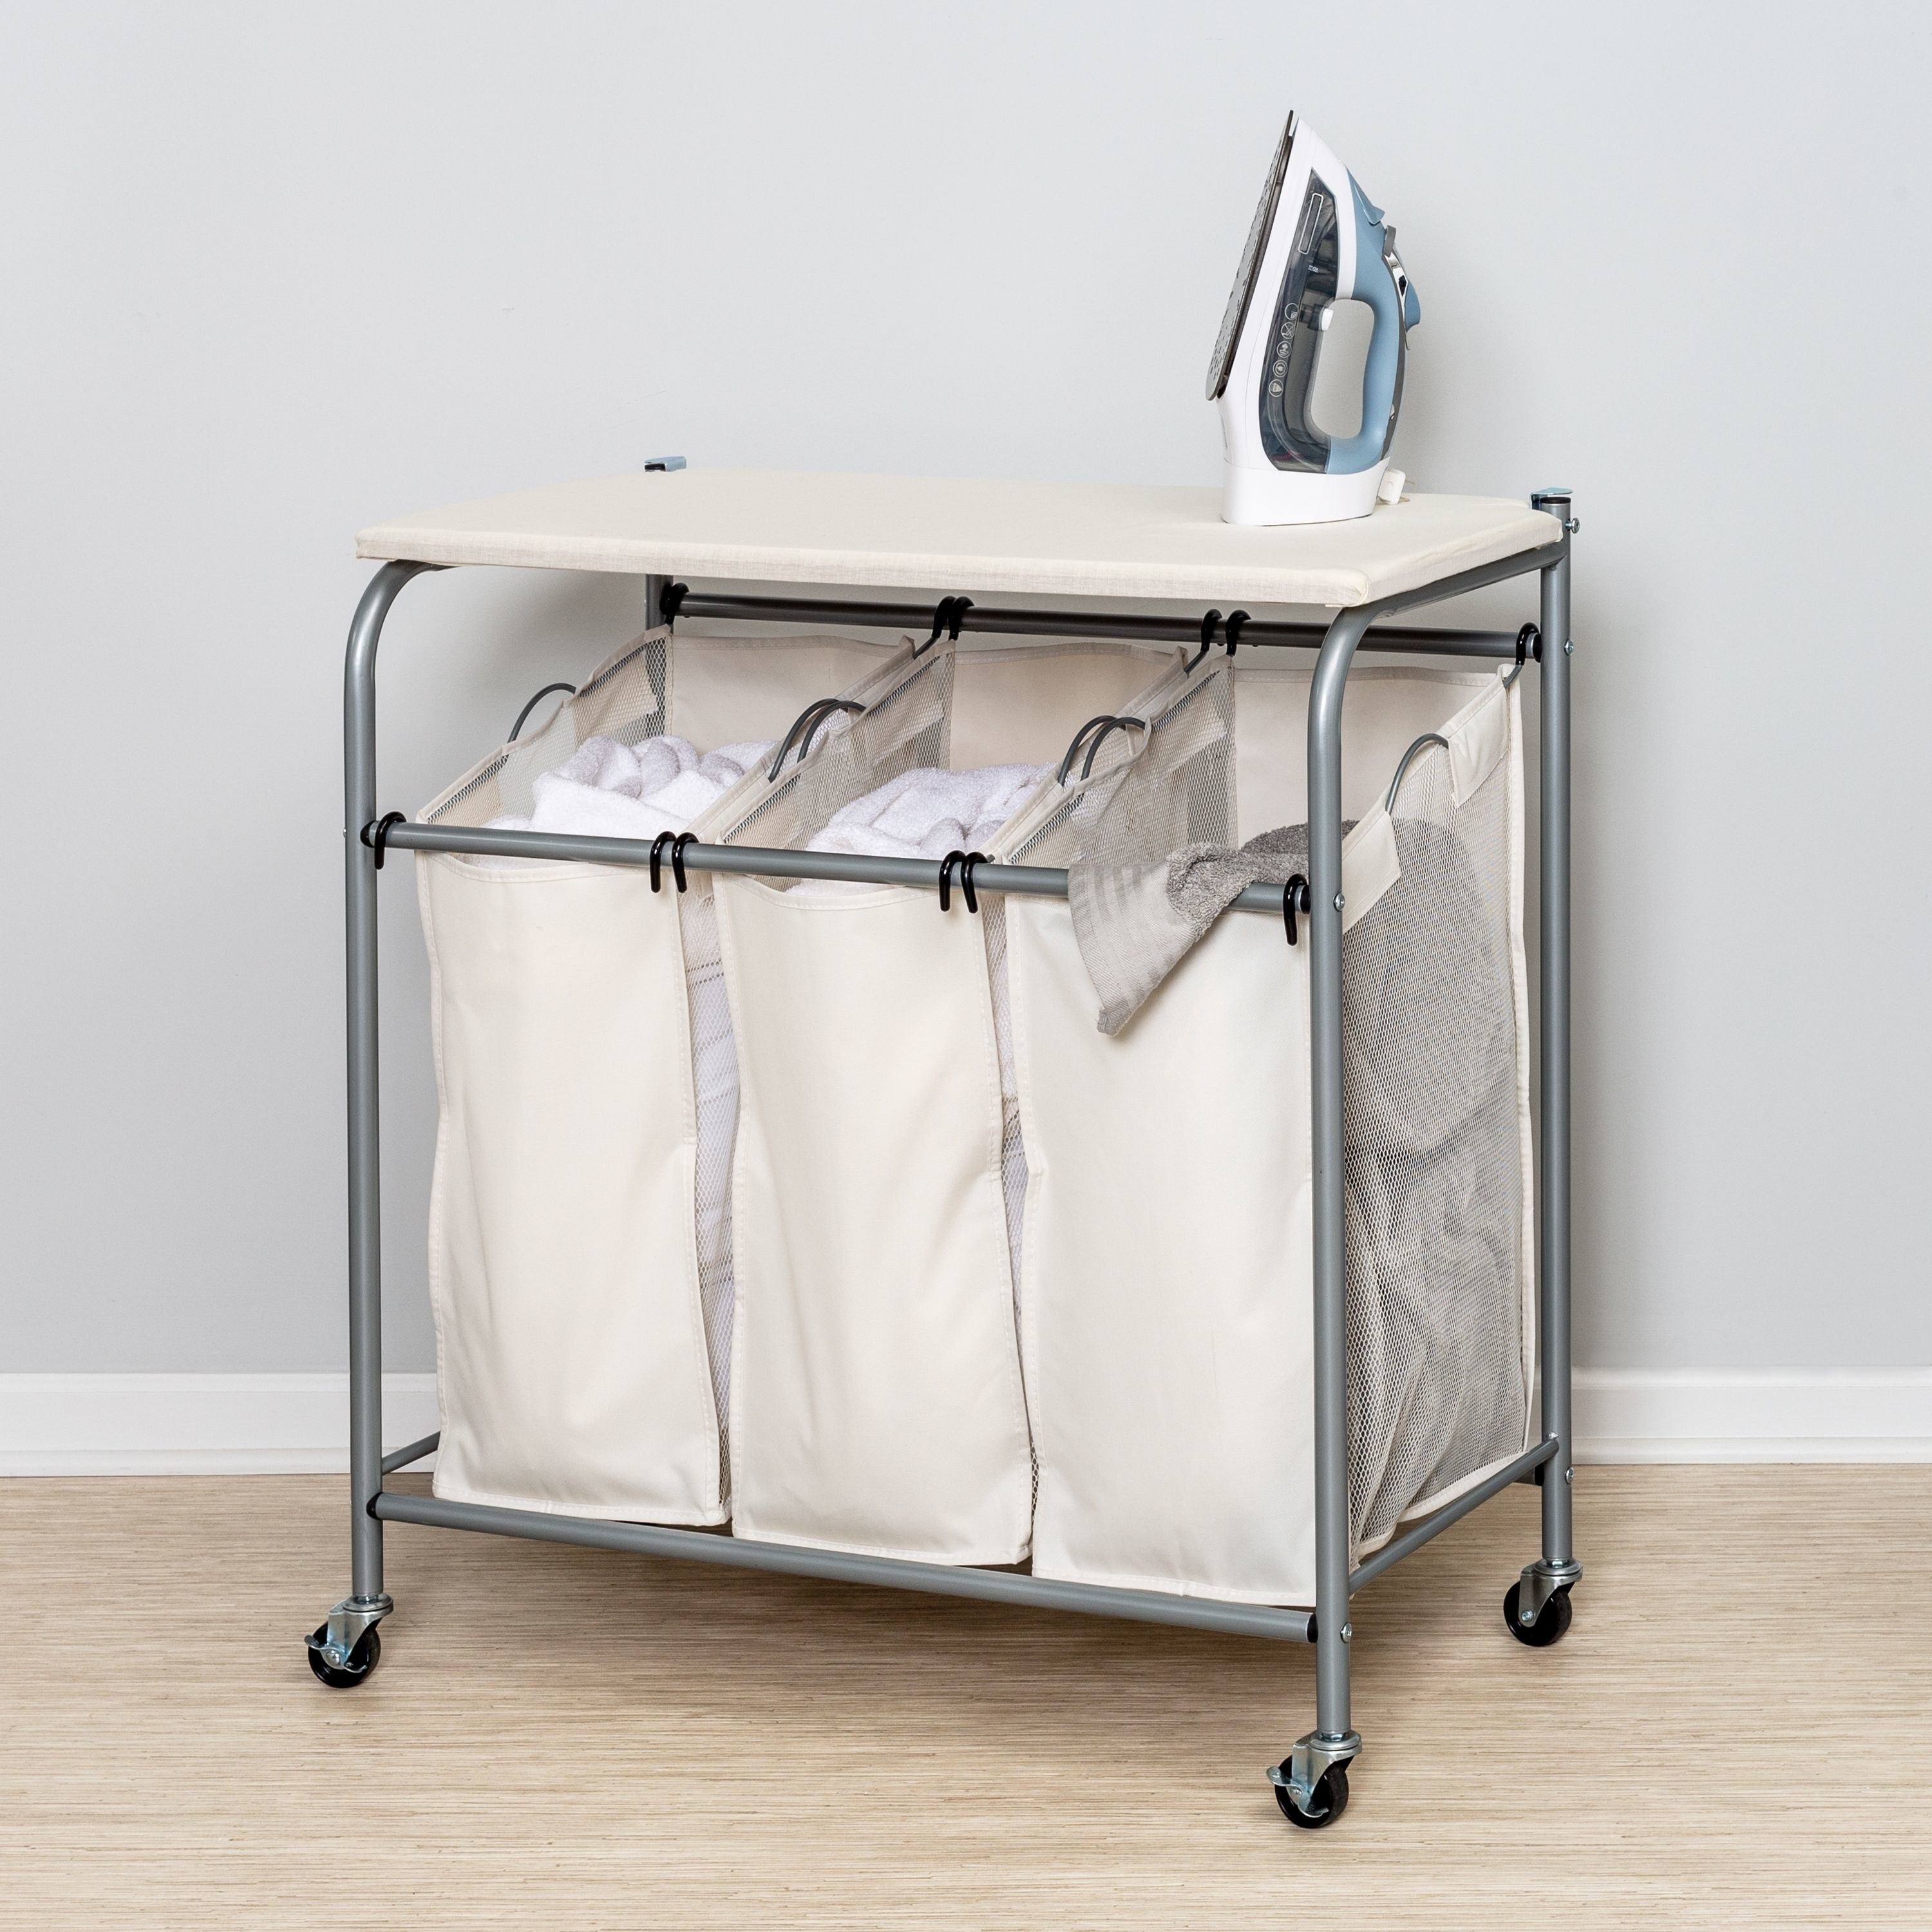 The triple basket laundry sorter on wheels with a top shelf for ironing